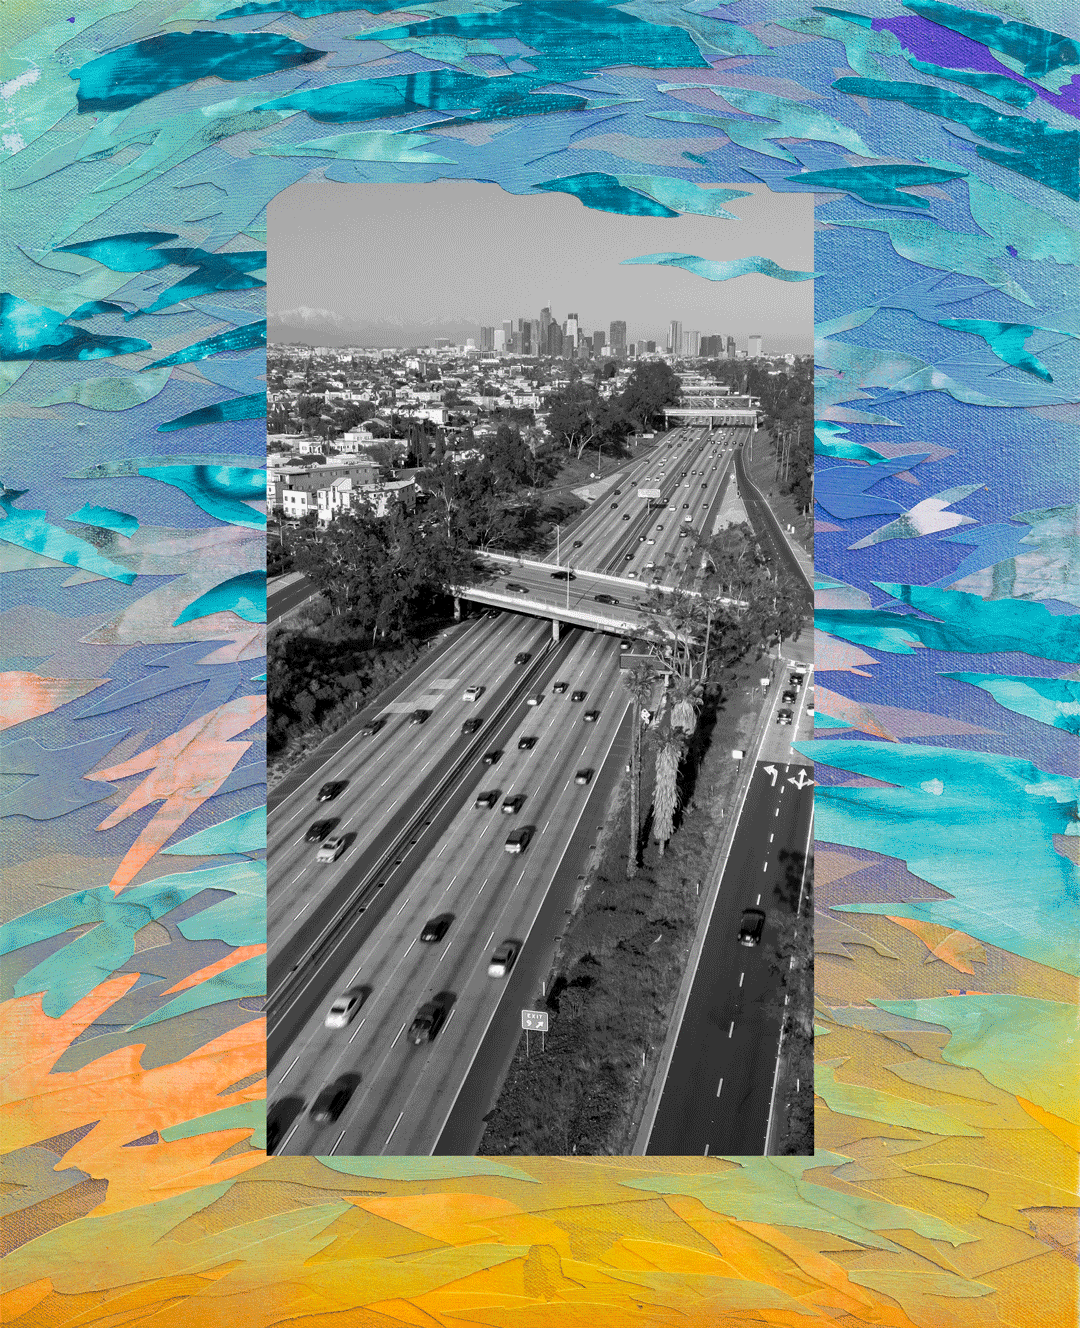 mixed media artwork depicting an L.A. freeway being covered by water